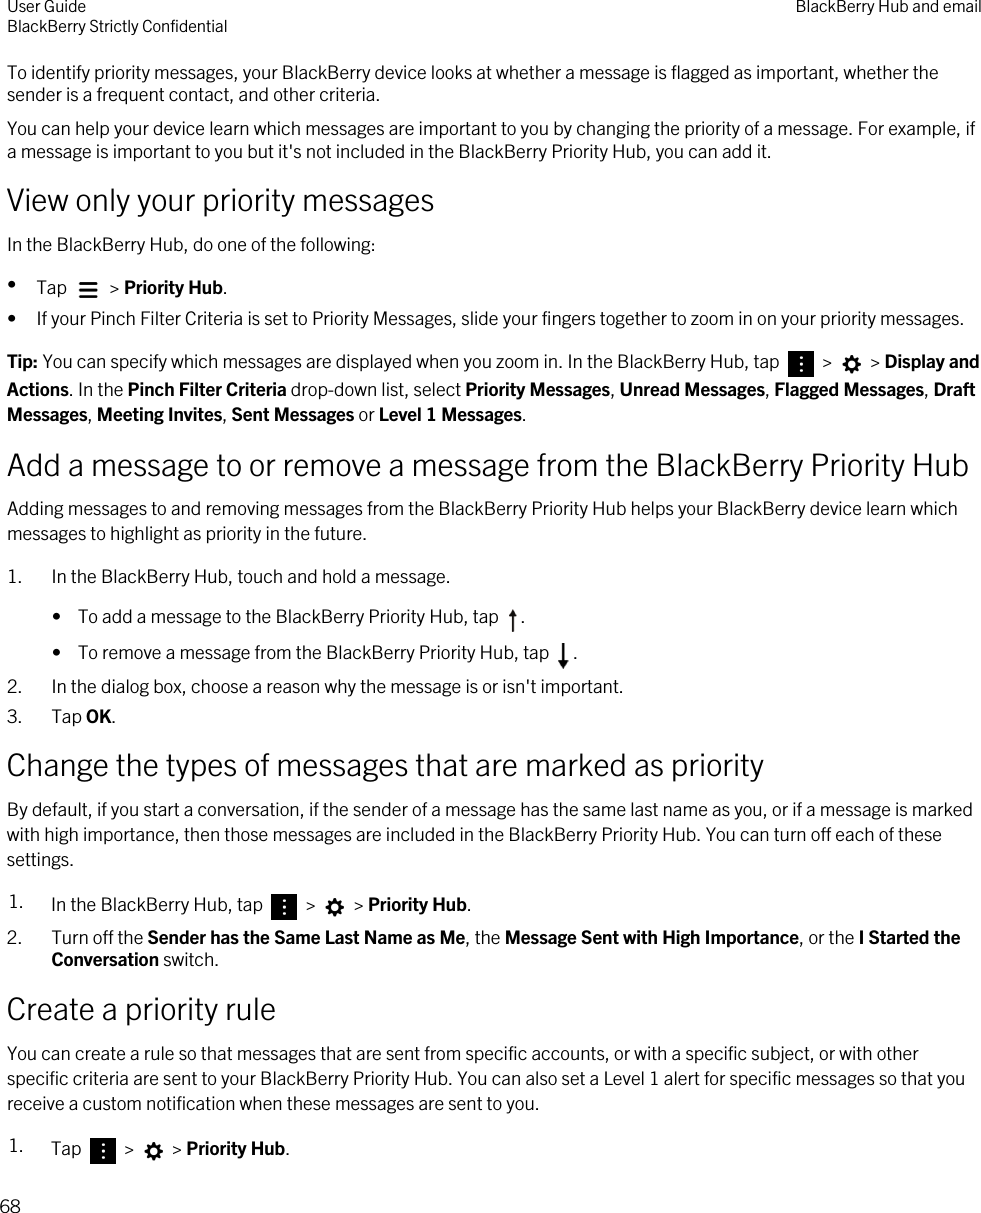 To identify priority messages, your BlackBerry device looks at whether a message is flagged as important, whether the sender is a frequent contact, and other criteria.You can help your device learn which messages are important to you by changing the priority of a message. For example, if a message is important to you but it&apos;s not included in the BlackBerry Priority Hub, you can add it.View only your priority messagesIn the BlackBerry Hub, do one of the following:•Tap   &gt; Priority Hub.• If your Pinch Filter Criteria is set to Priority Messages, slide your fingers together to zoom in on your priority messages.Tip: You can specify which messages are displayed when you zoom in. In the BlackBerry Hub, tap   &gt;   &gt; Display and Actions. In the Pinch Filter Criteria drop-down list, select Priority Messages, Unread Messages, Flagged Messages, Draft Messages, Meeting Invites, Sent Messages or Level 1 Messages.Add a message to or remove a message from the BlackBerry Priority HubAdding messages to and removing messages from the BlackBerry Priority Hub helps your BlackBerry device learn which messages to highlight as priority in the future.1. In the BlackBerry Hub, touch and hold a message.•  To add a message to the BlackBerry Priority Hub, tap  .•  To remove a message from the BlackBerry Priority Hub, tap  .2. In the dialog box, choose a reason why the message is or isn&apos;t important.3. Tap OK.Change the types of messages that are marked as priorityBy default, if you start a conversation, if the sender of a message has the same last name as you, or if a message is marked with high importance, then those messages are included in the BlackBerry Priority Hub. You can turn off each of these settings.1. In the BlackBerry Hub, tap   &gt;   &gt; Priority Hub.2. Turn off the Sender has the Same Last Name as Me, the Message Sent with High Importance, or the I Started the Conversation switch.Create a priority ruleYou can create a rule so that messages that are sent from specific accounts, or with a specific subject, or with other specific criteria are sent to your BlackBerry Priority Hub. You can also set a Level 1 alert for specific messages so that you receive a custom notification when these messages are sent to you.1. Tap   &gt;   &gt; Priority Hub.User GuideBlackBerry Strictly Confidential BlackBerry Hub and email68